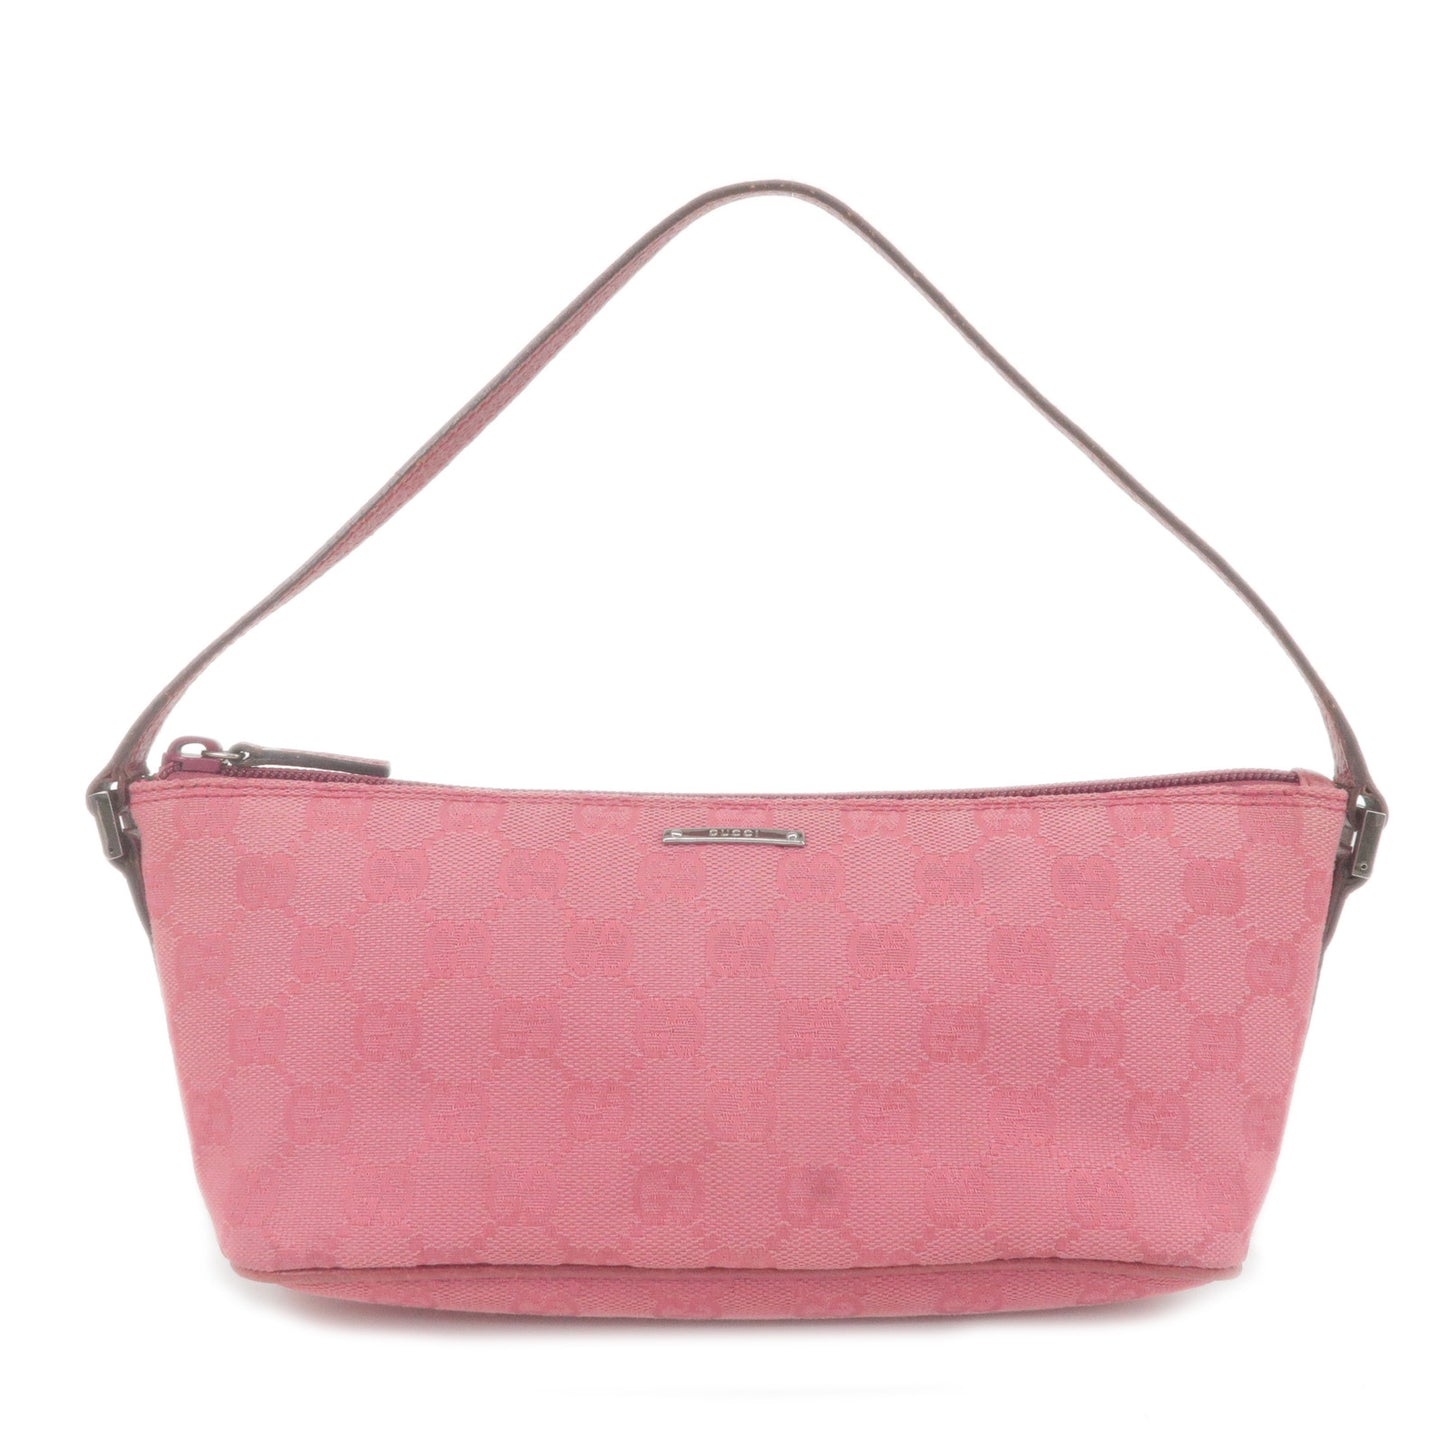 GUCCI-GG-Canvas-Leather-Boat-Bag-Hand-Bag-Purse-Pink-07198